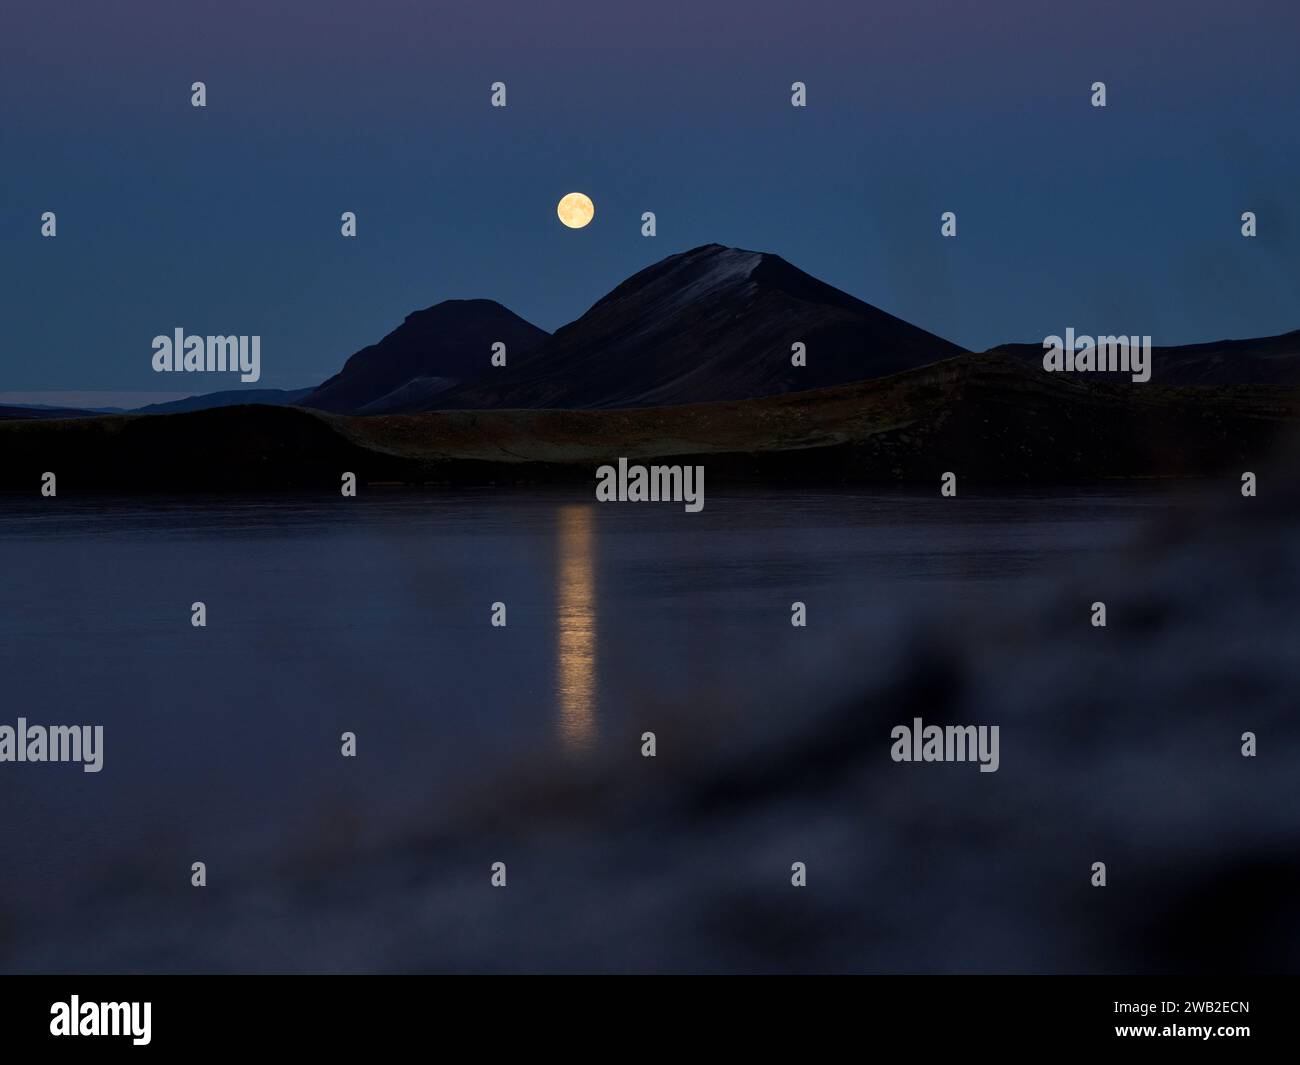 Scenic moonrise on night sky over lake and mountains Stock Photo